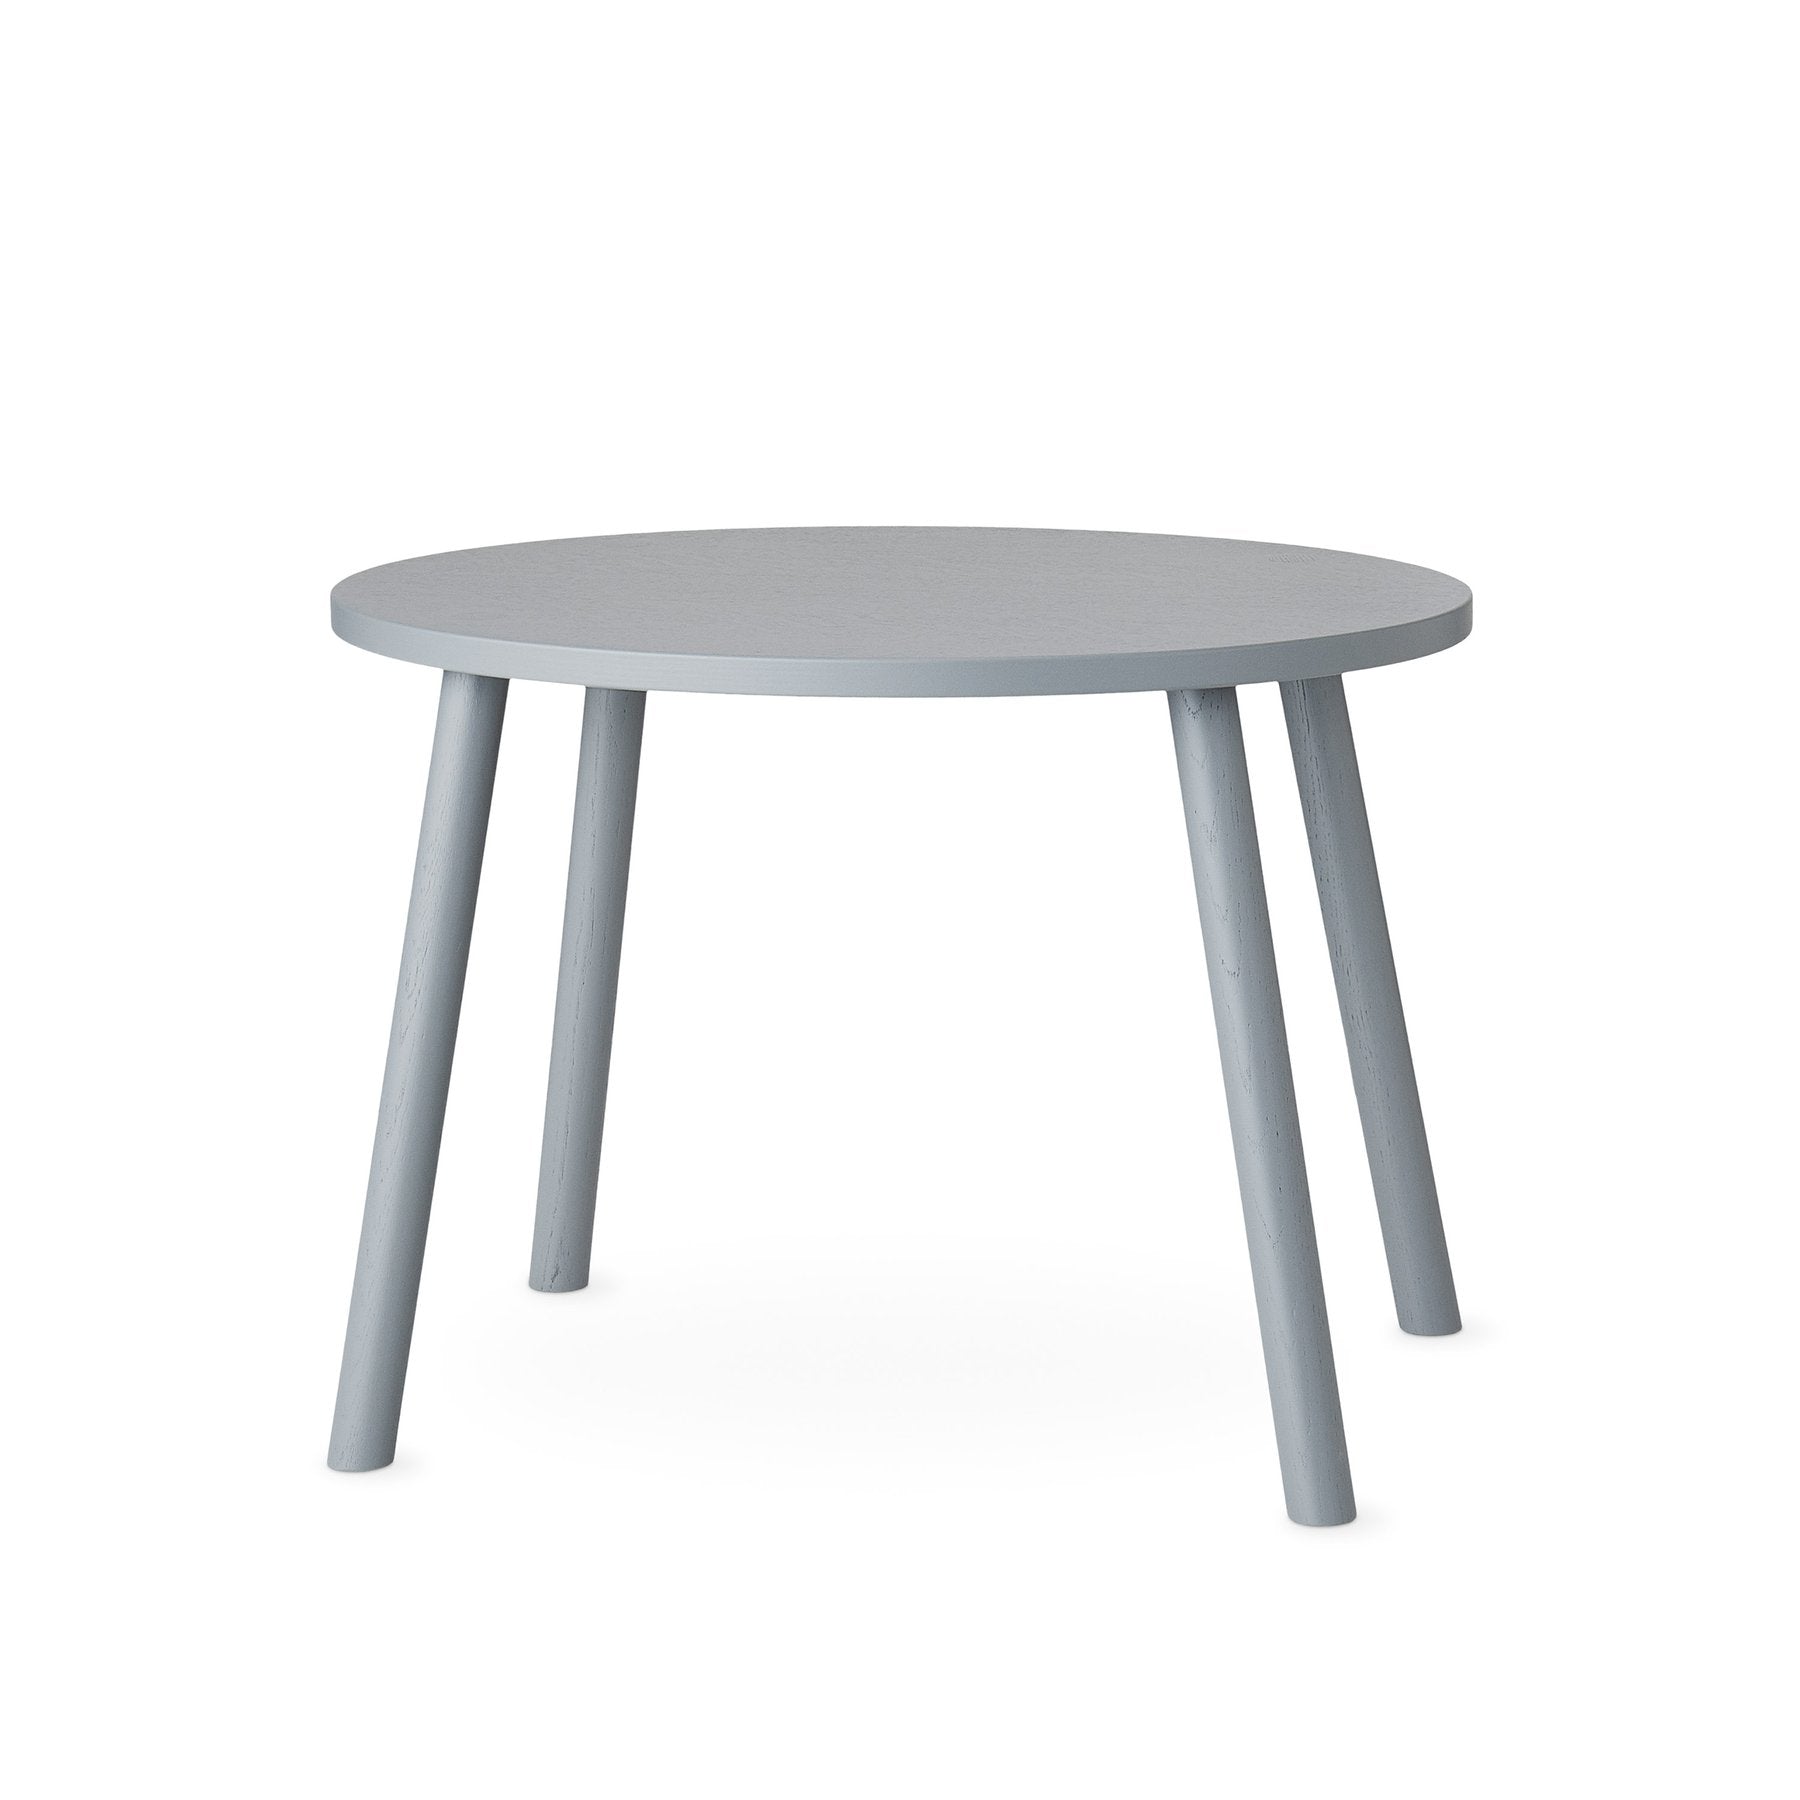 MOUSE TABLE GREY